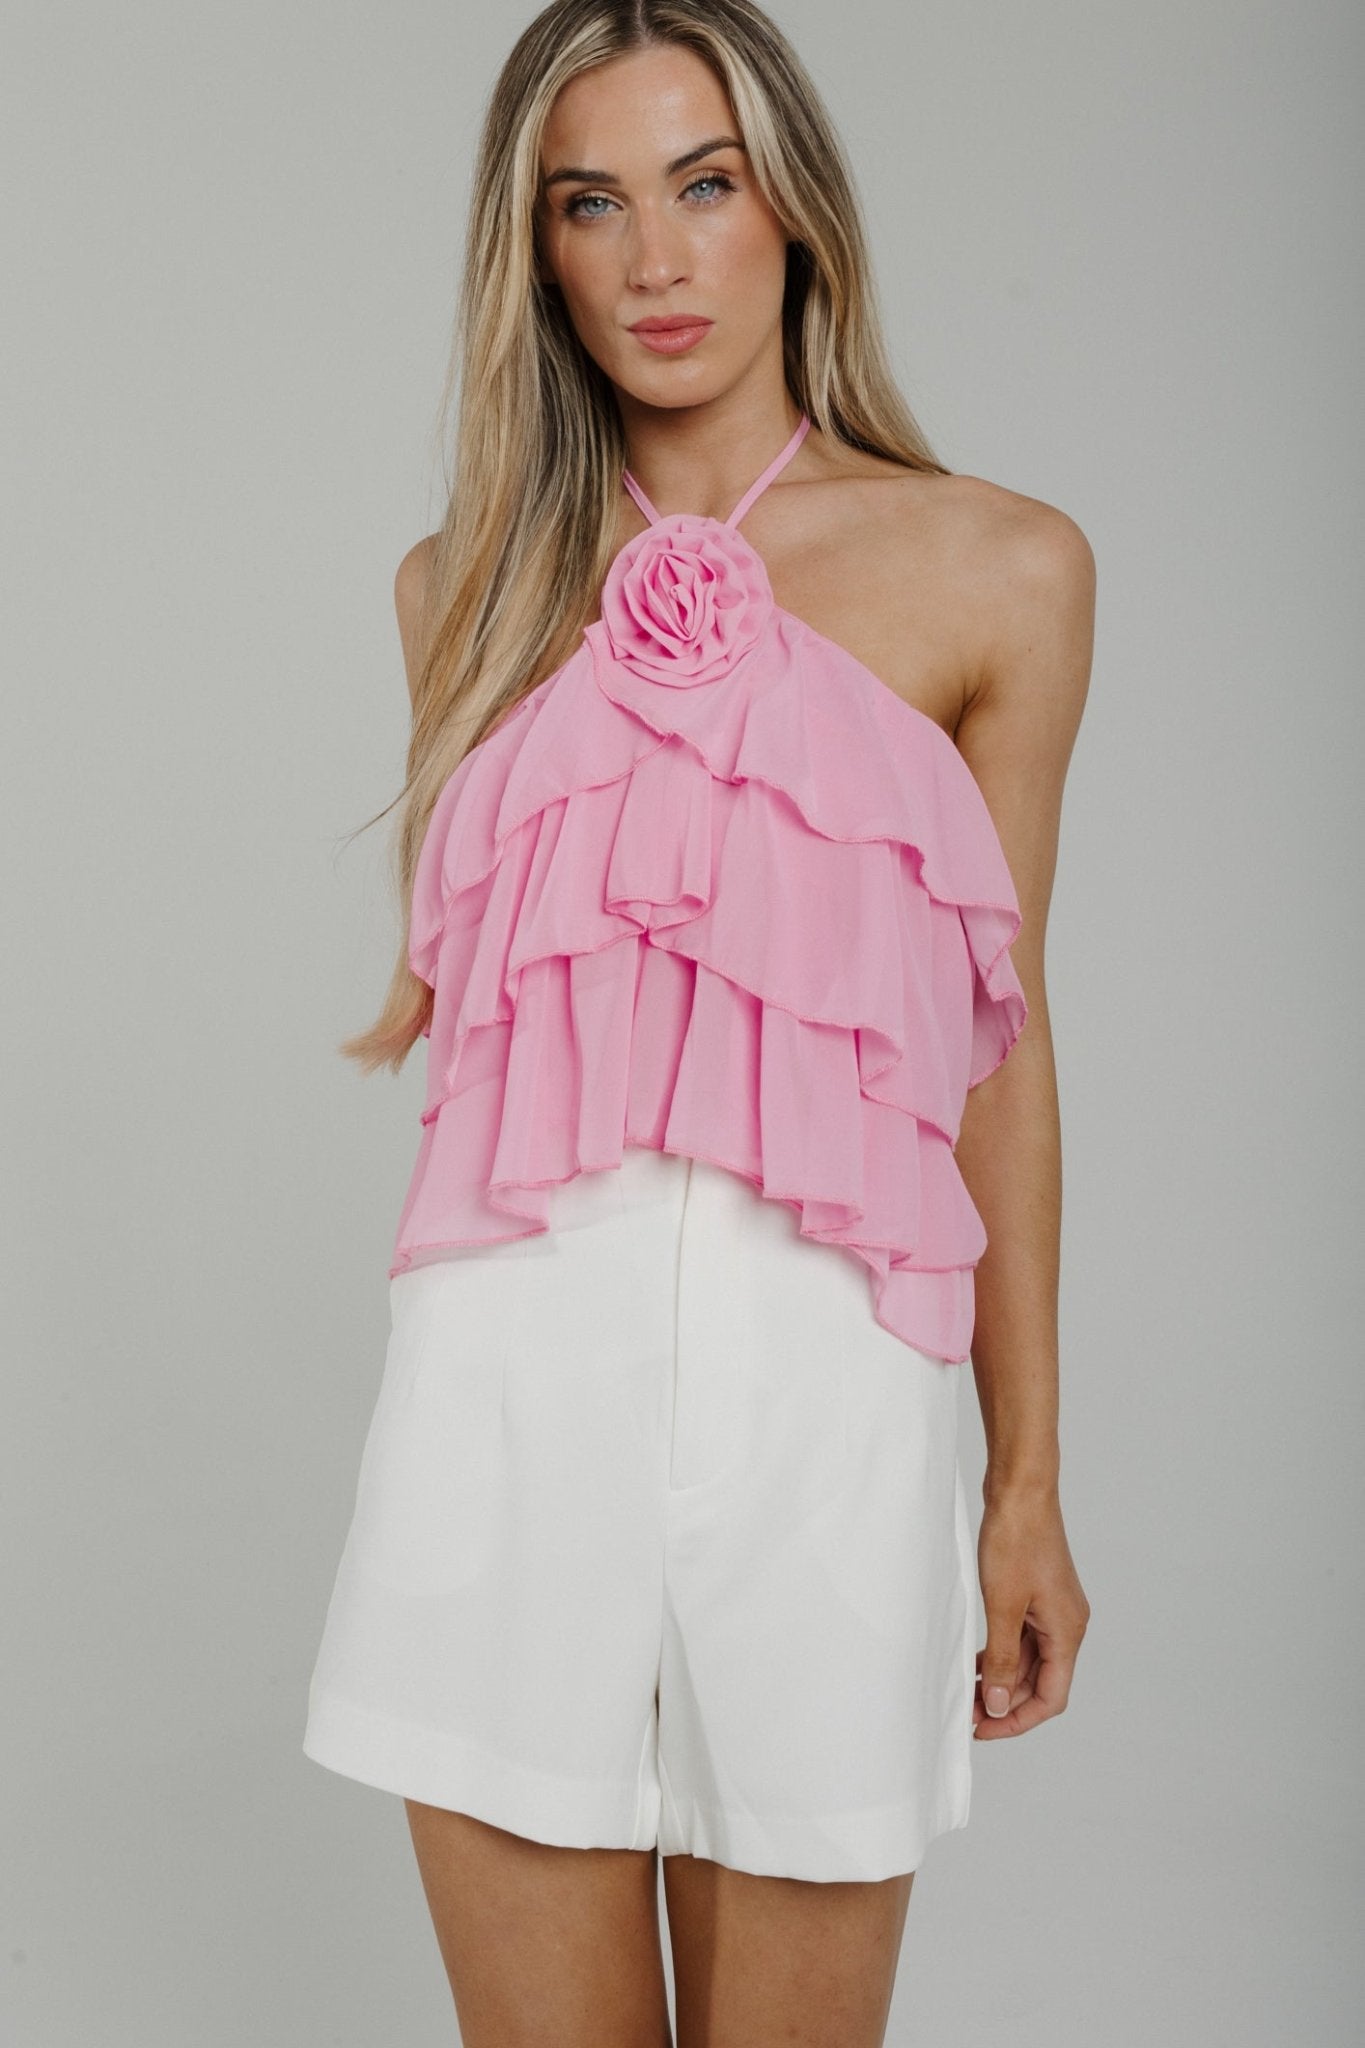 Holly Rose Detail Halter Top In Pink - The Walk in Wardrobe